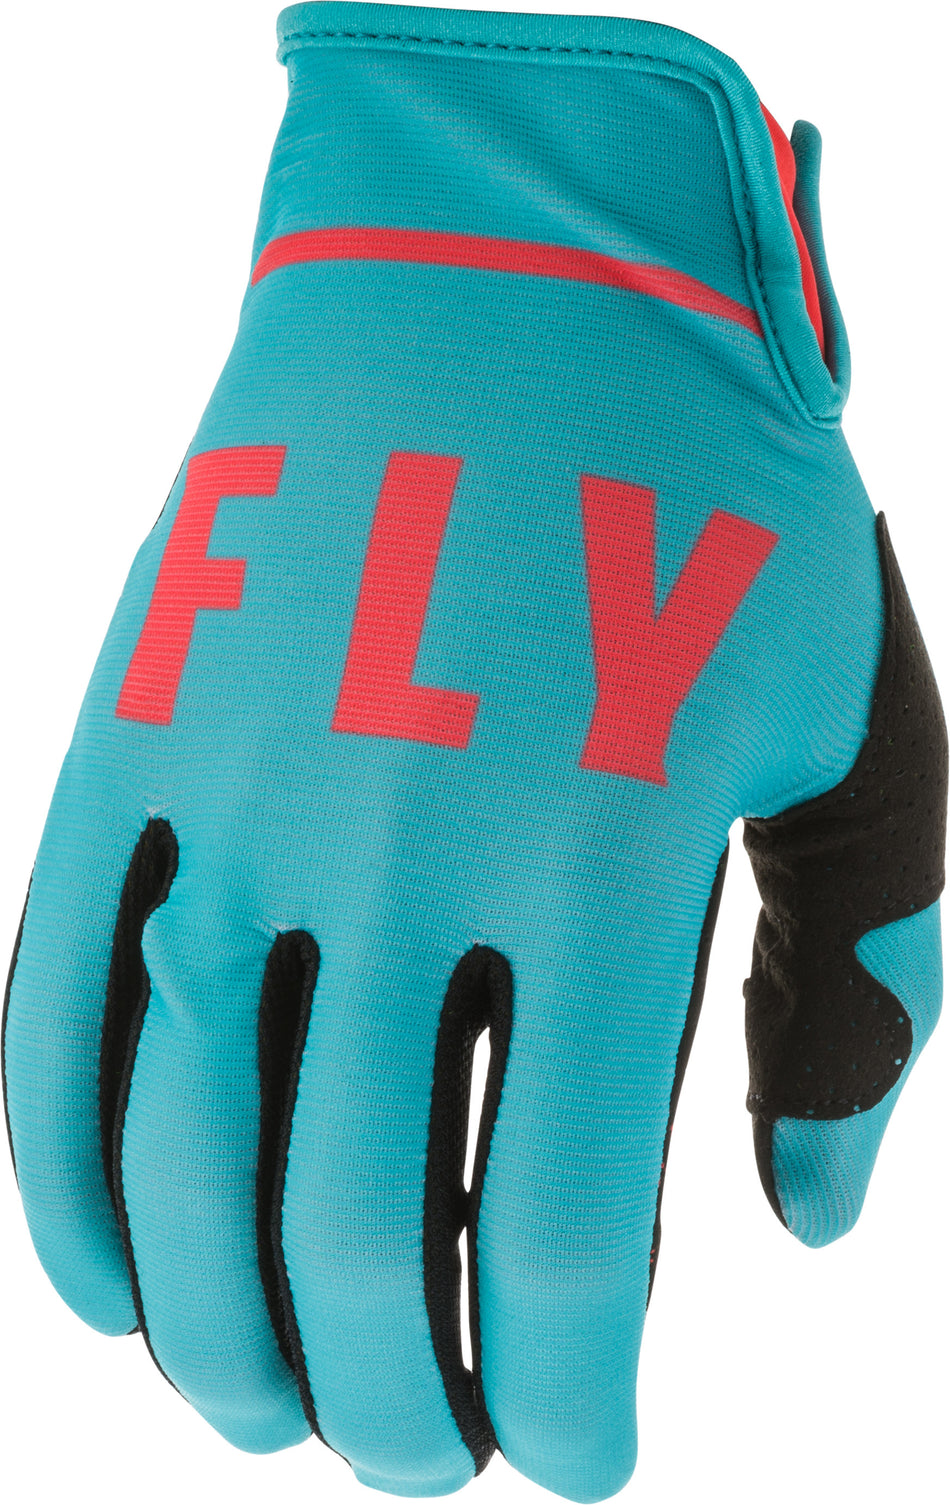 FLY RACING Lite Gloves Blue/Coral Sz 05 373-71905